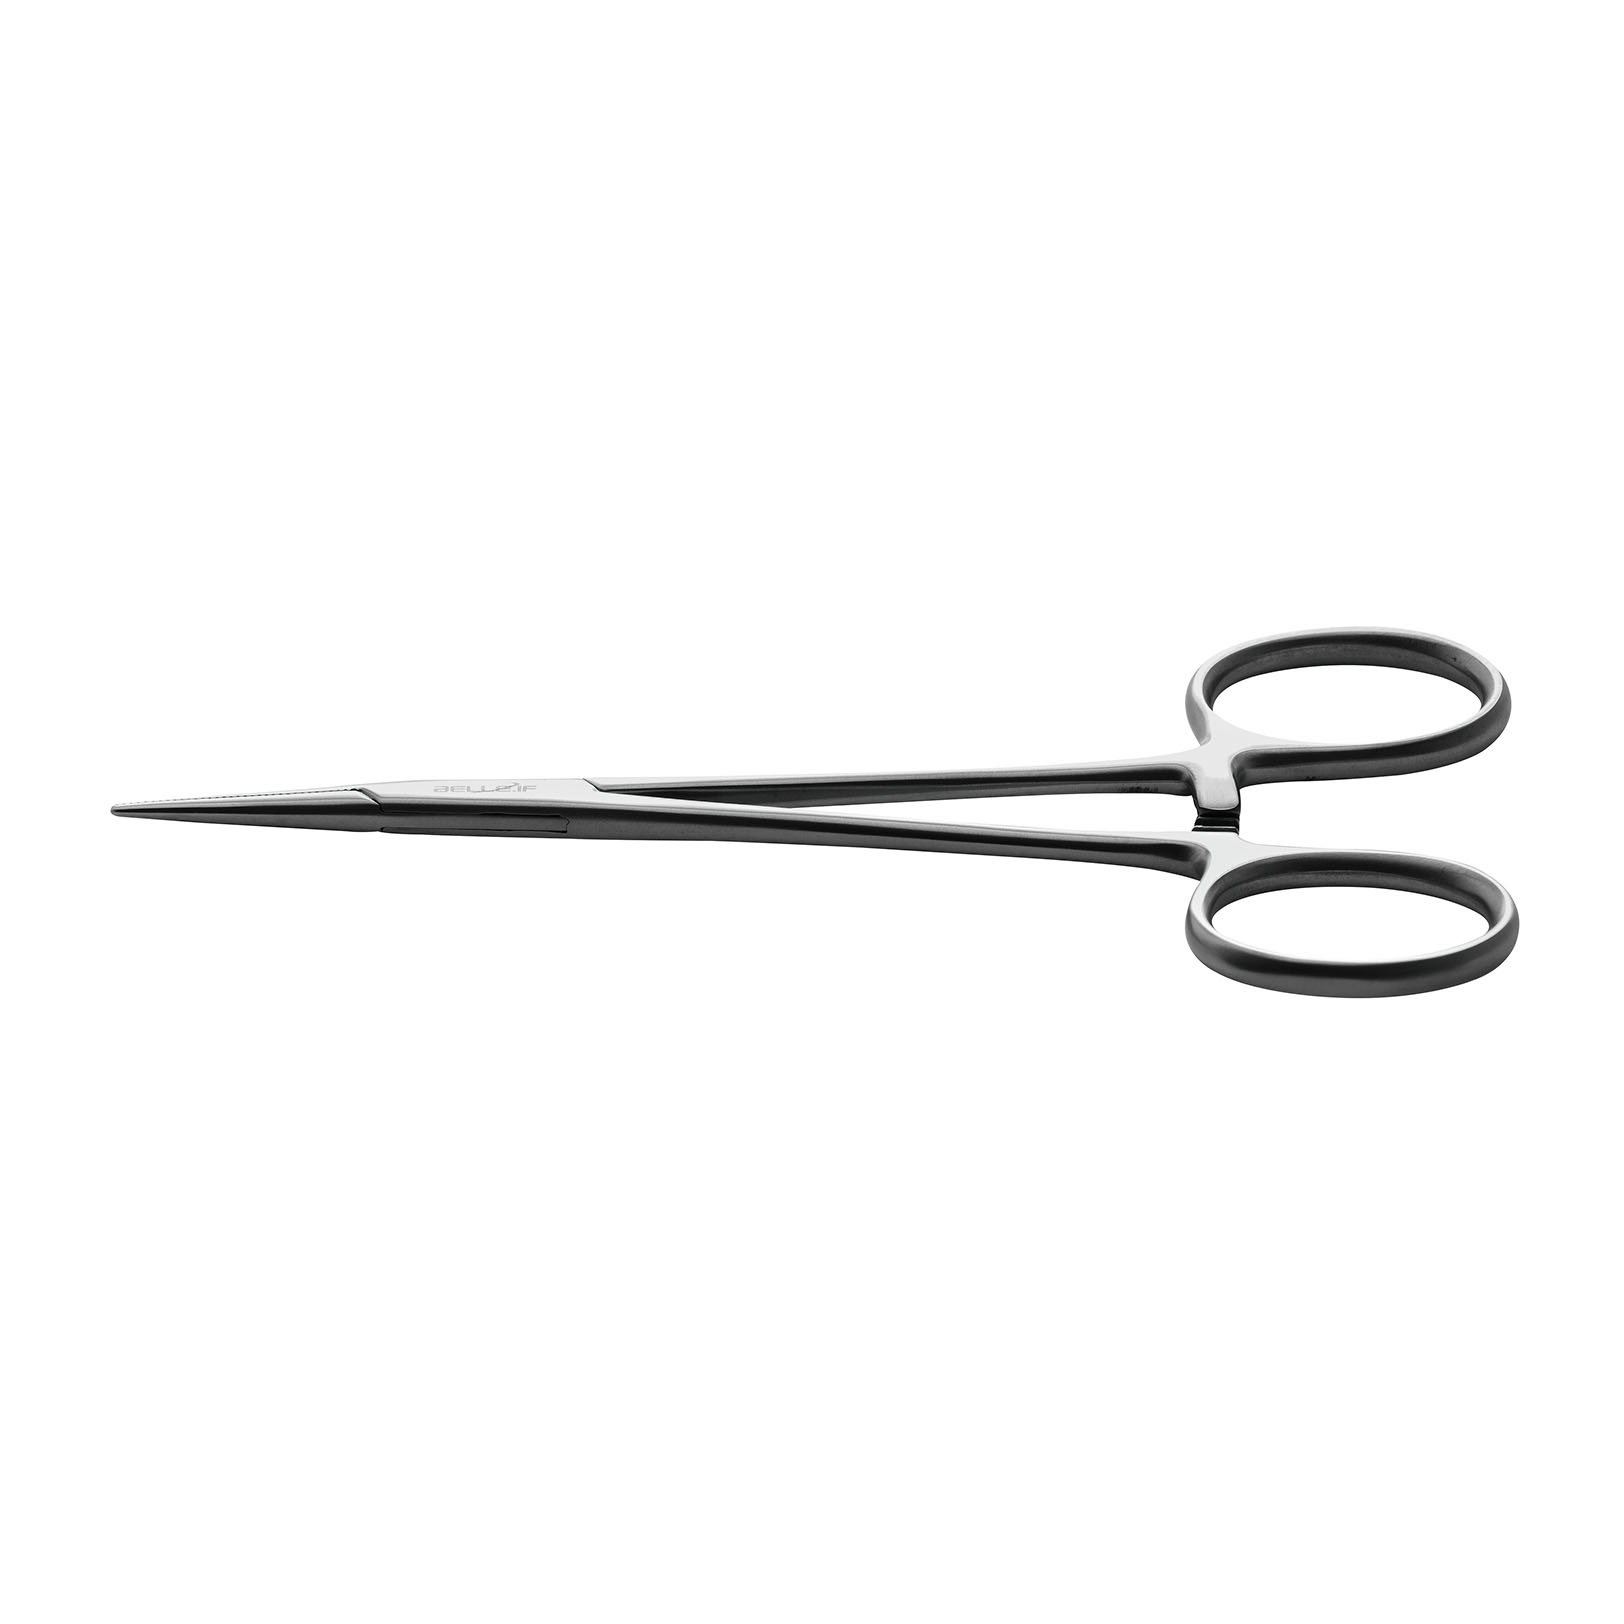 IF-9100 Stainless Steel Needle Holder 